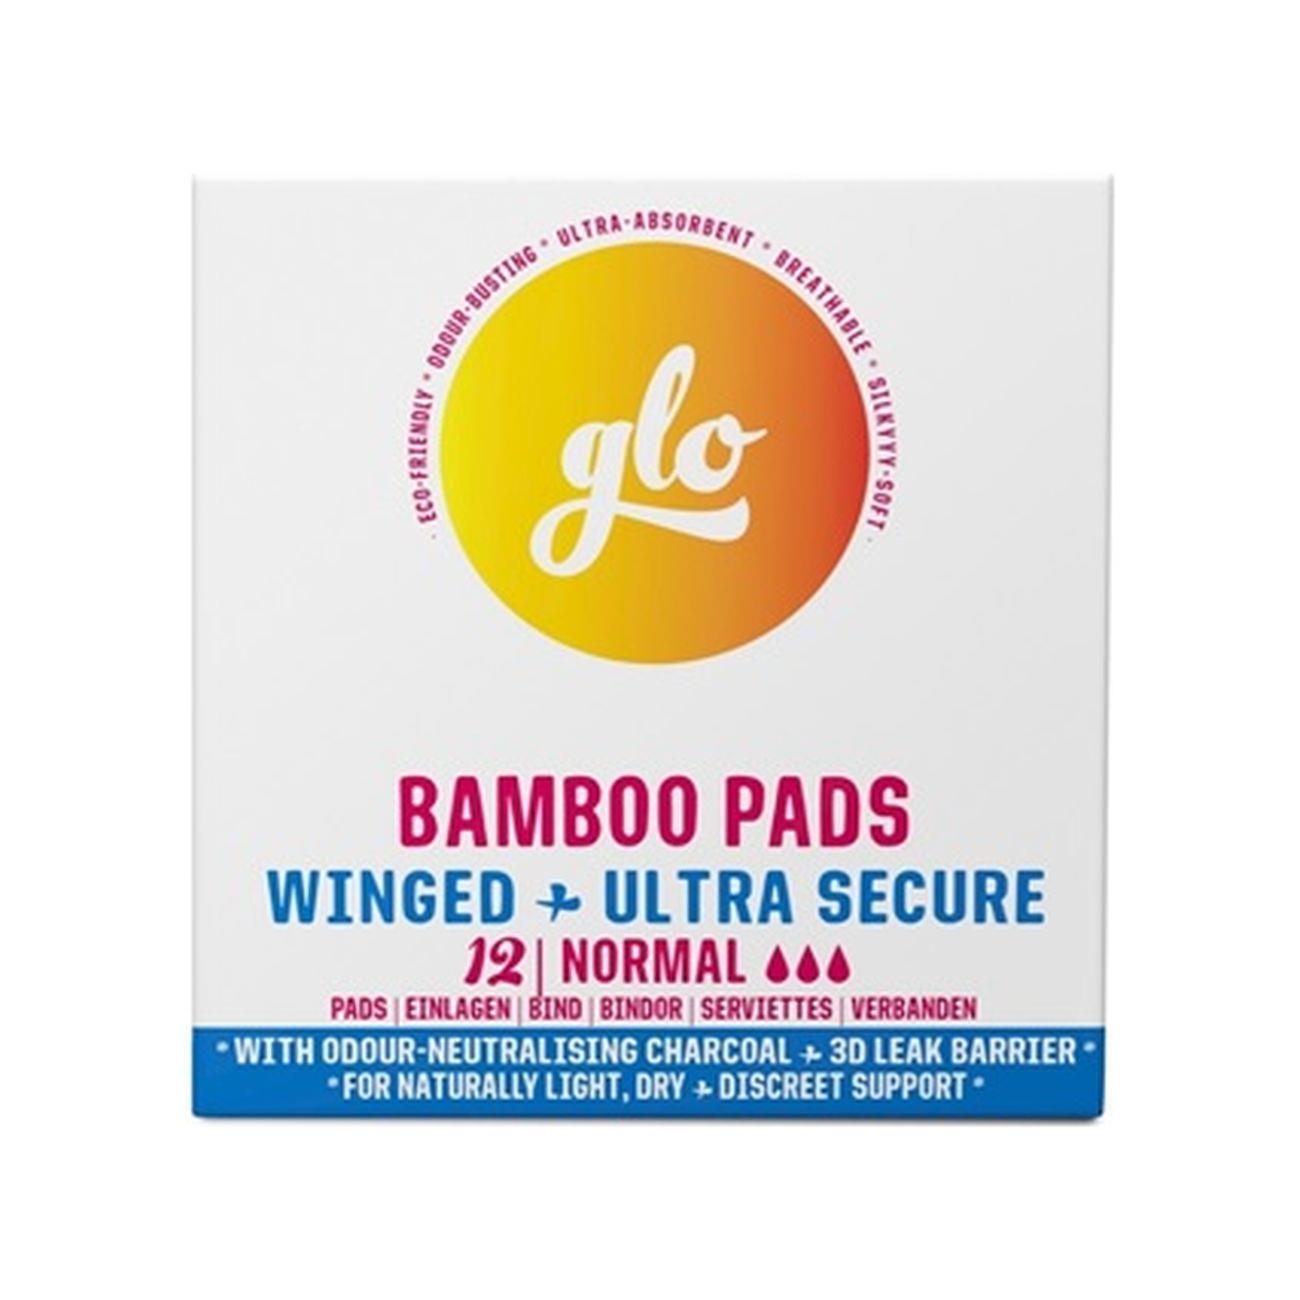 Glo Bamboo Pads for Sensitive Bladder (12 pads)